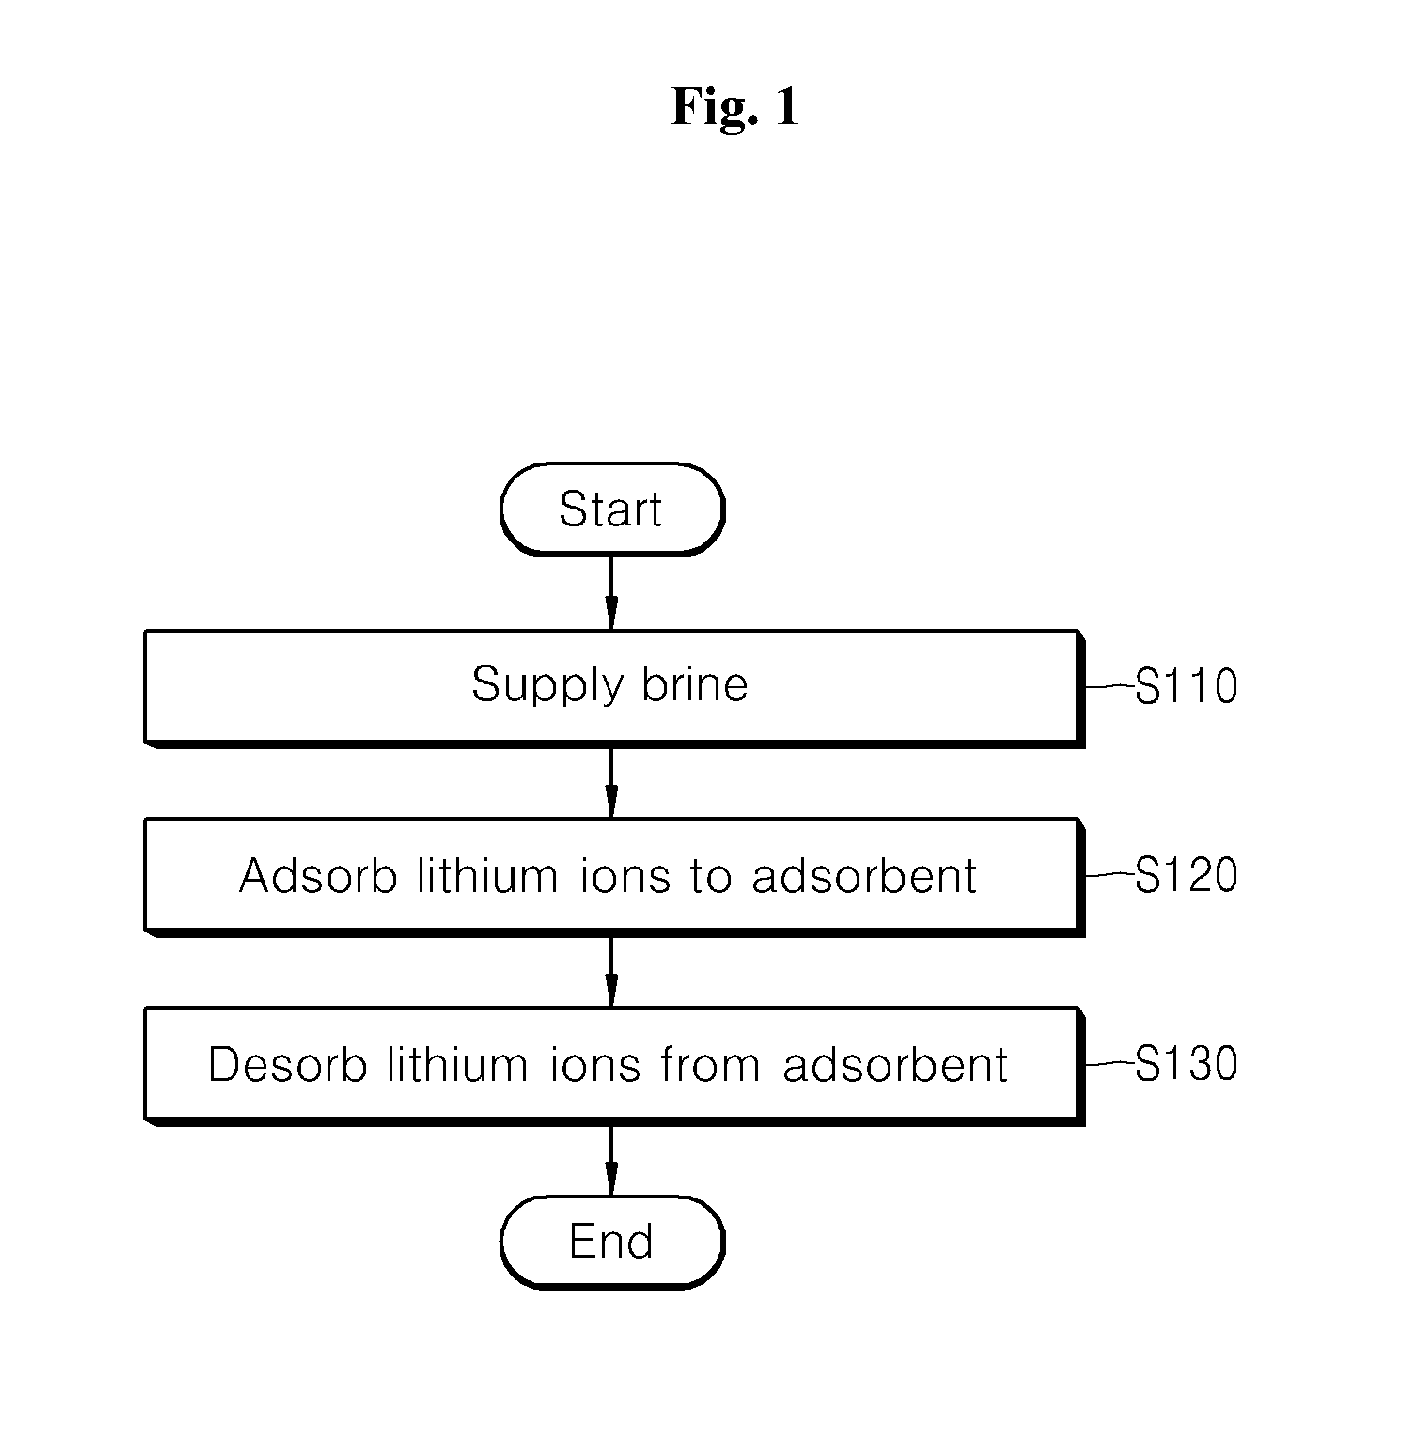 Apparatus and method for adsorbing and desorbing lithium ions using a ccd process